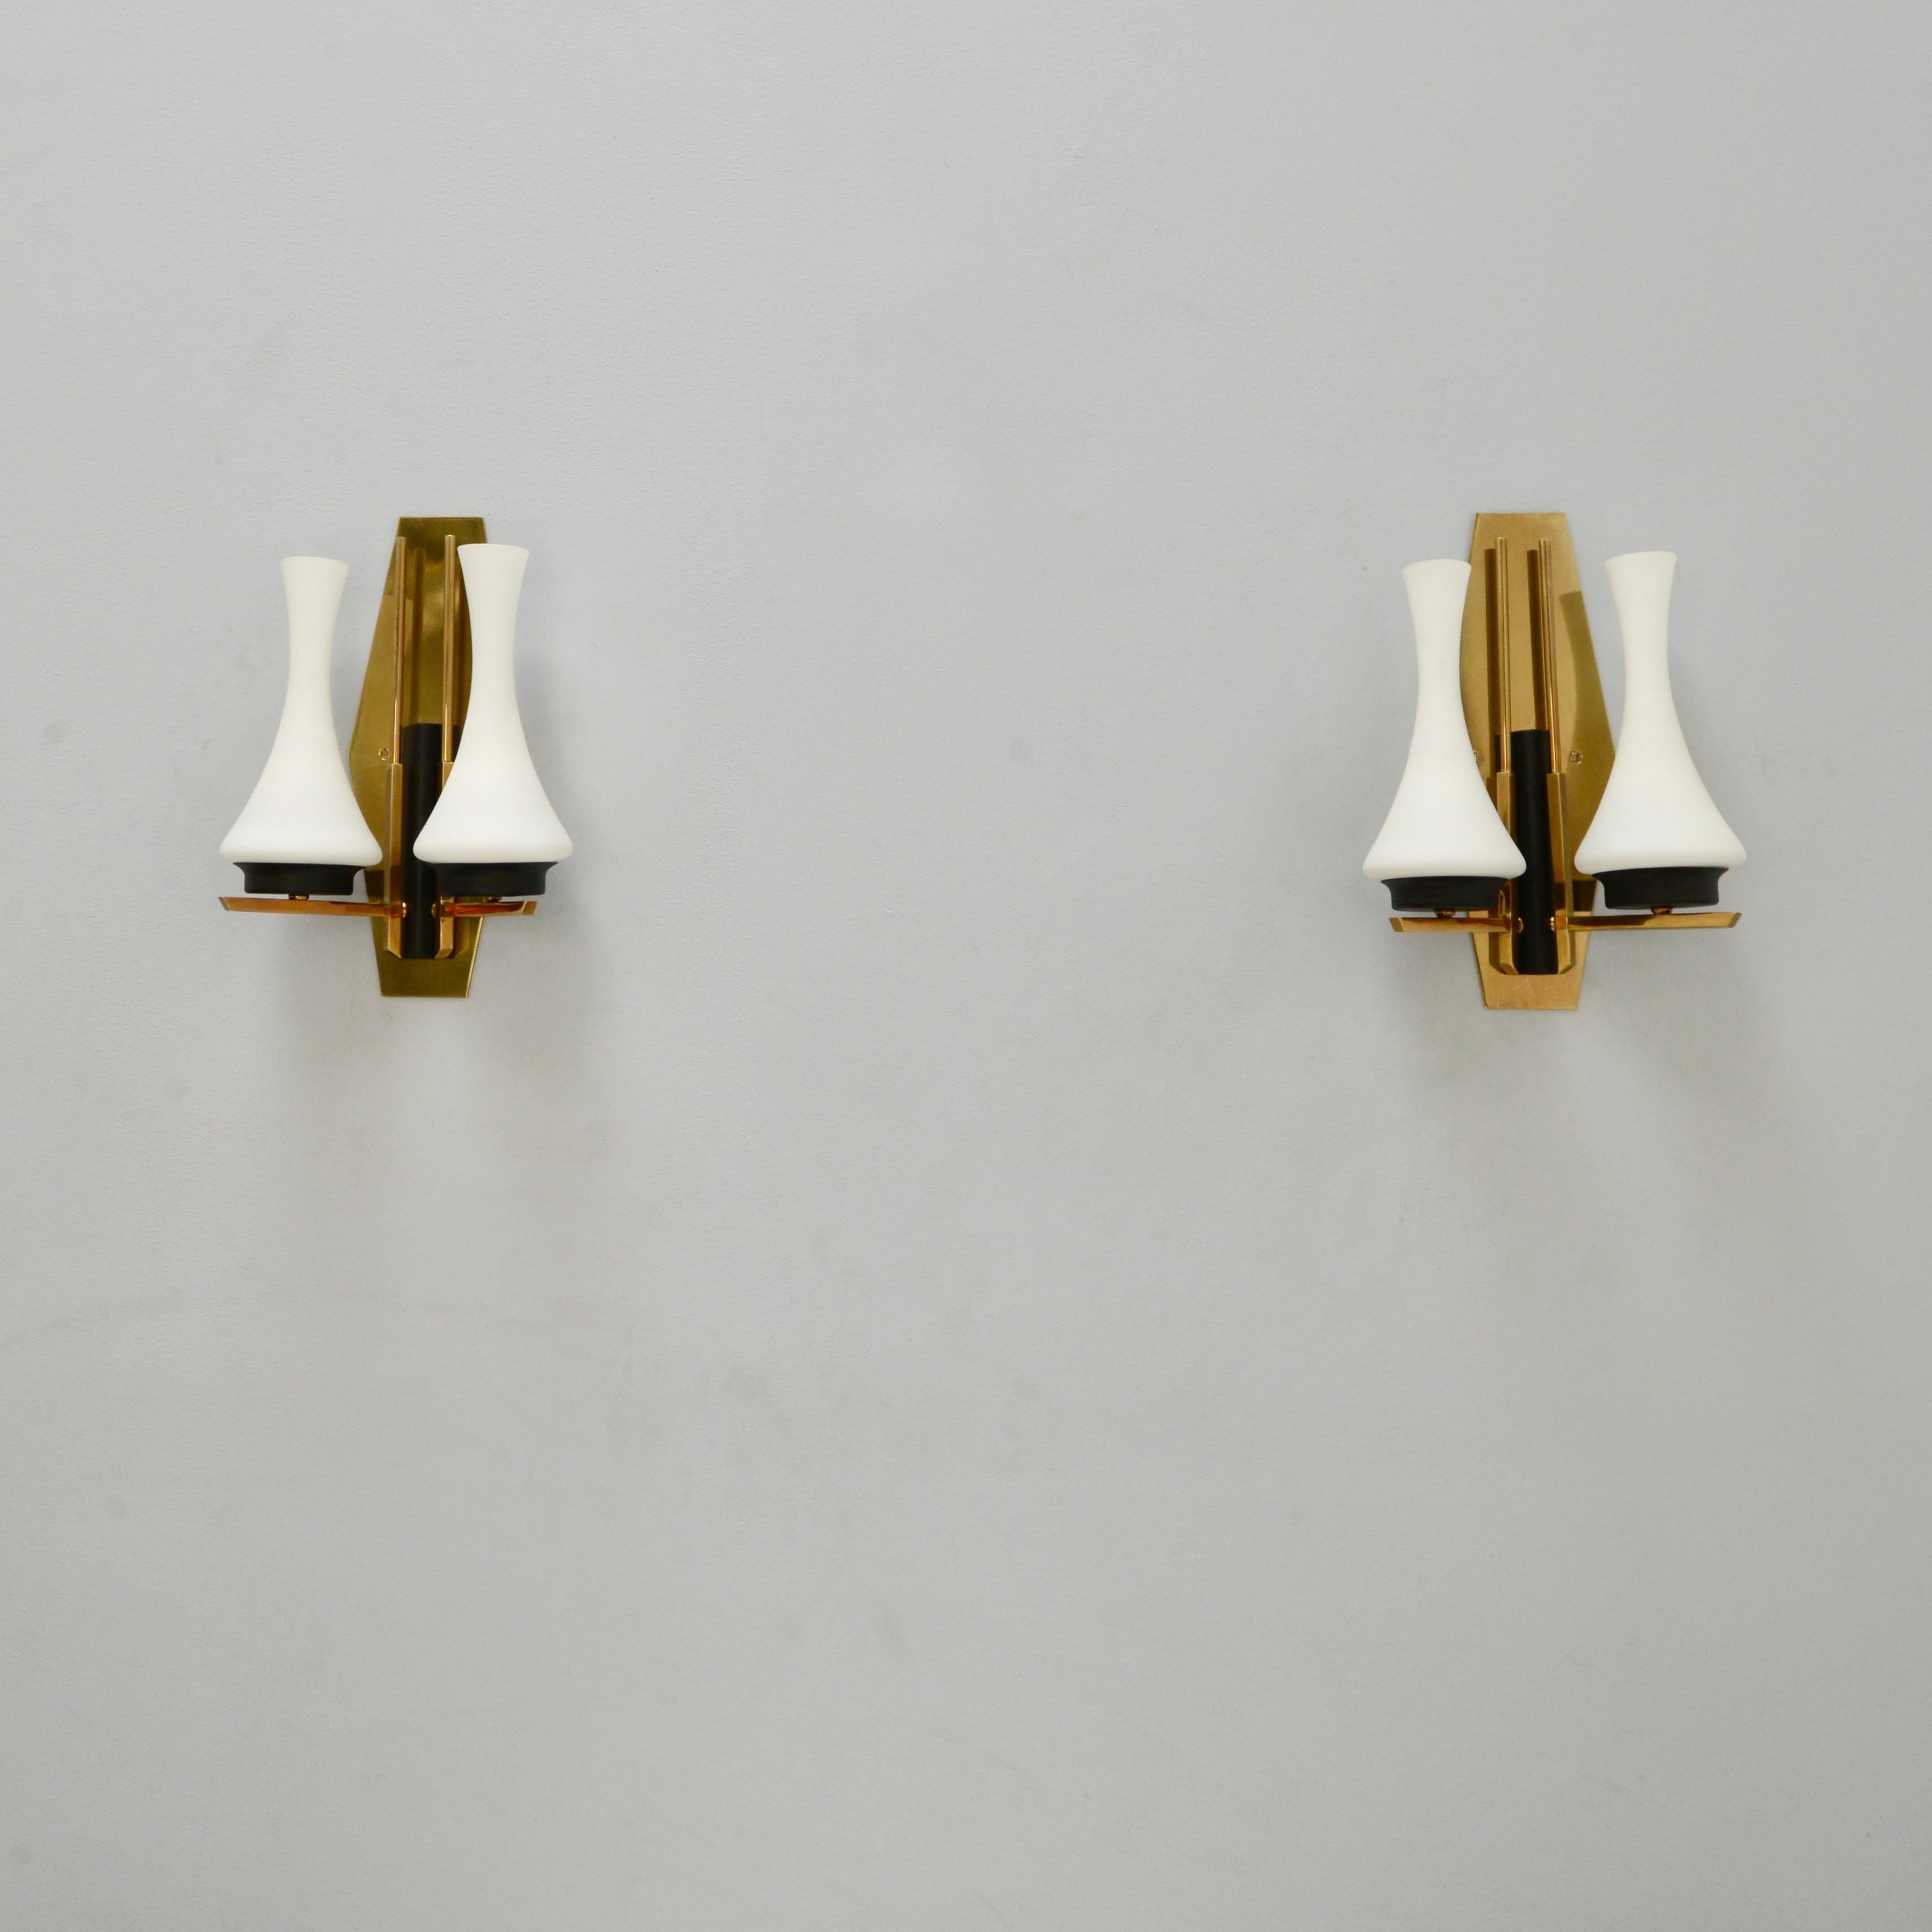 3 Mid-Century Modern Italian Silhouette sconces from the 1950s. These sconces have a lightly patinated brass finish, painted aluminum and steel and original glass shades. They are restored with 2 E12 candelabra based sockets per sconce, for use in